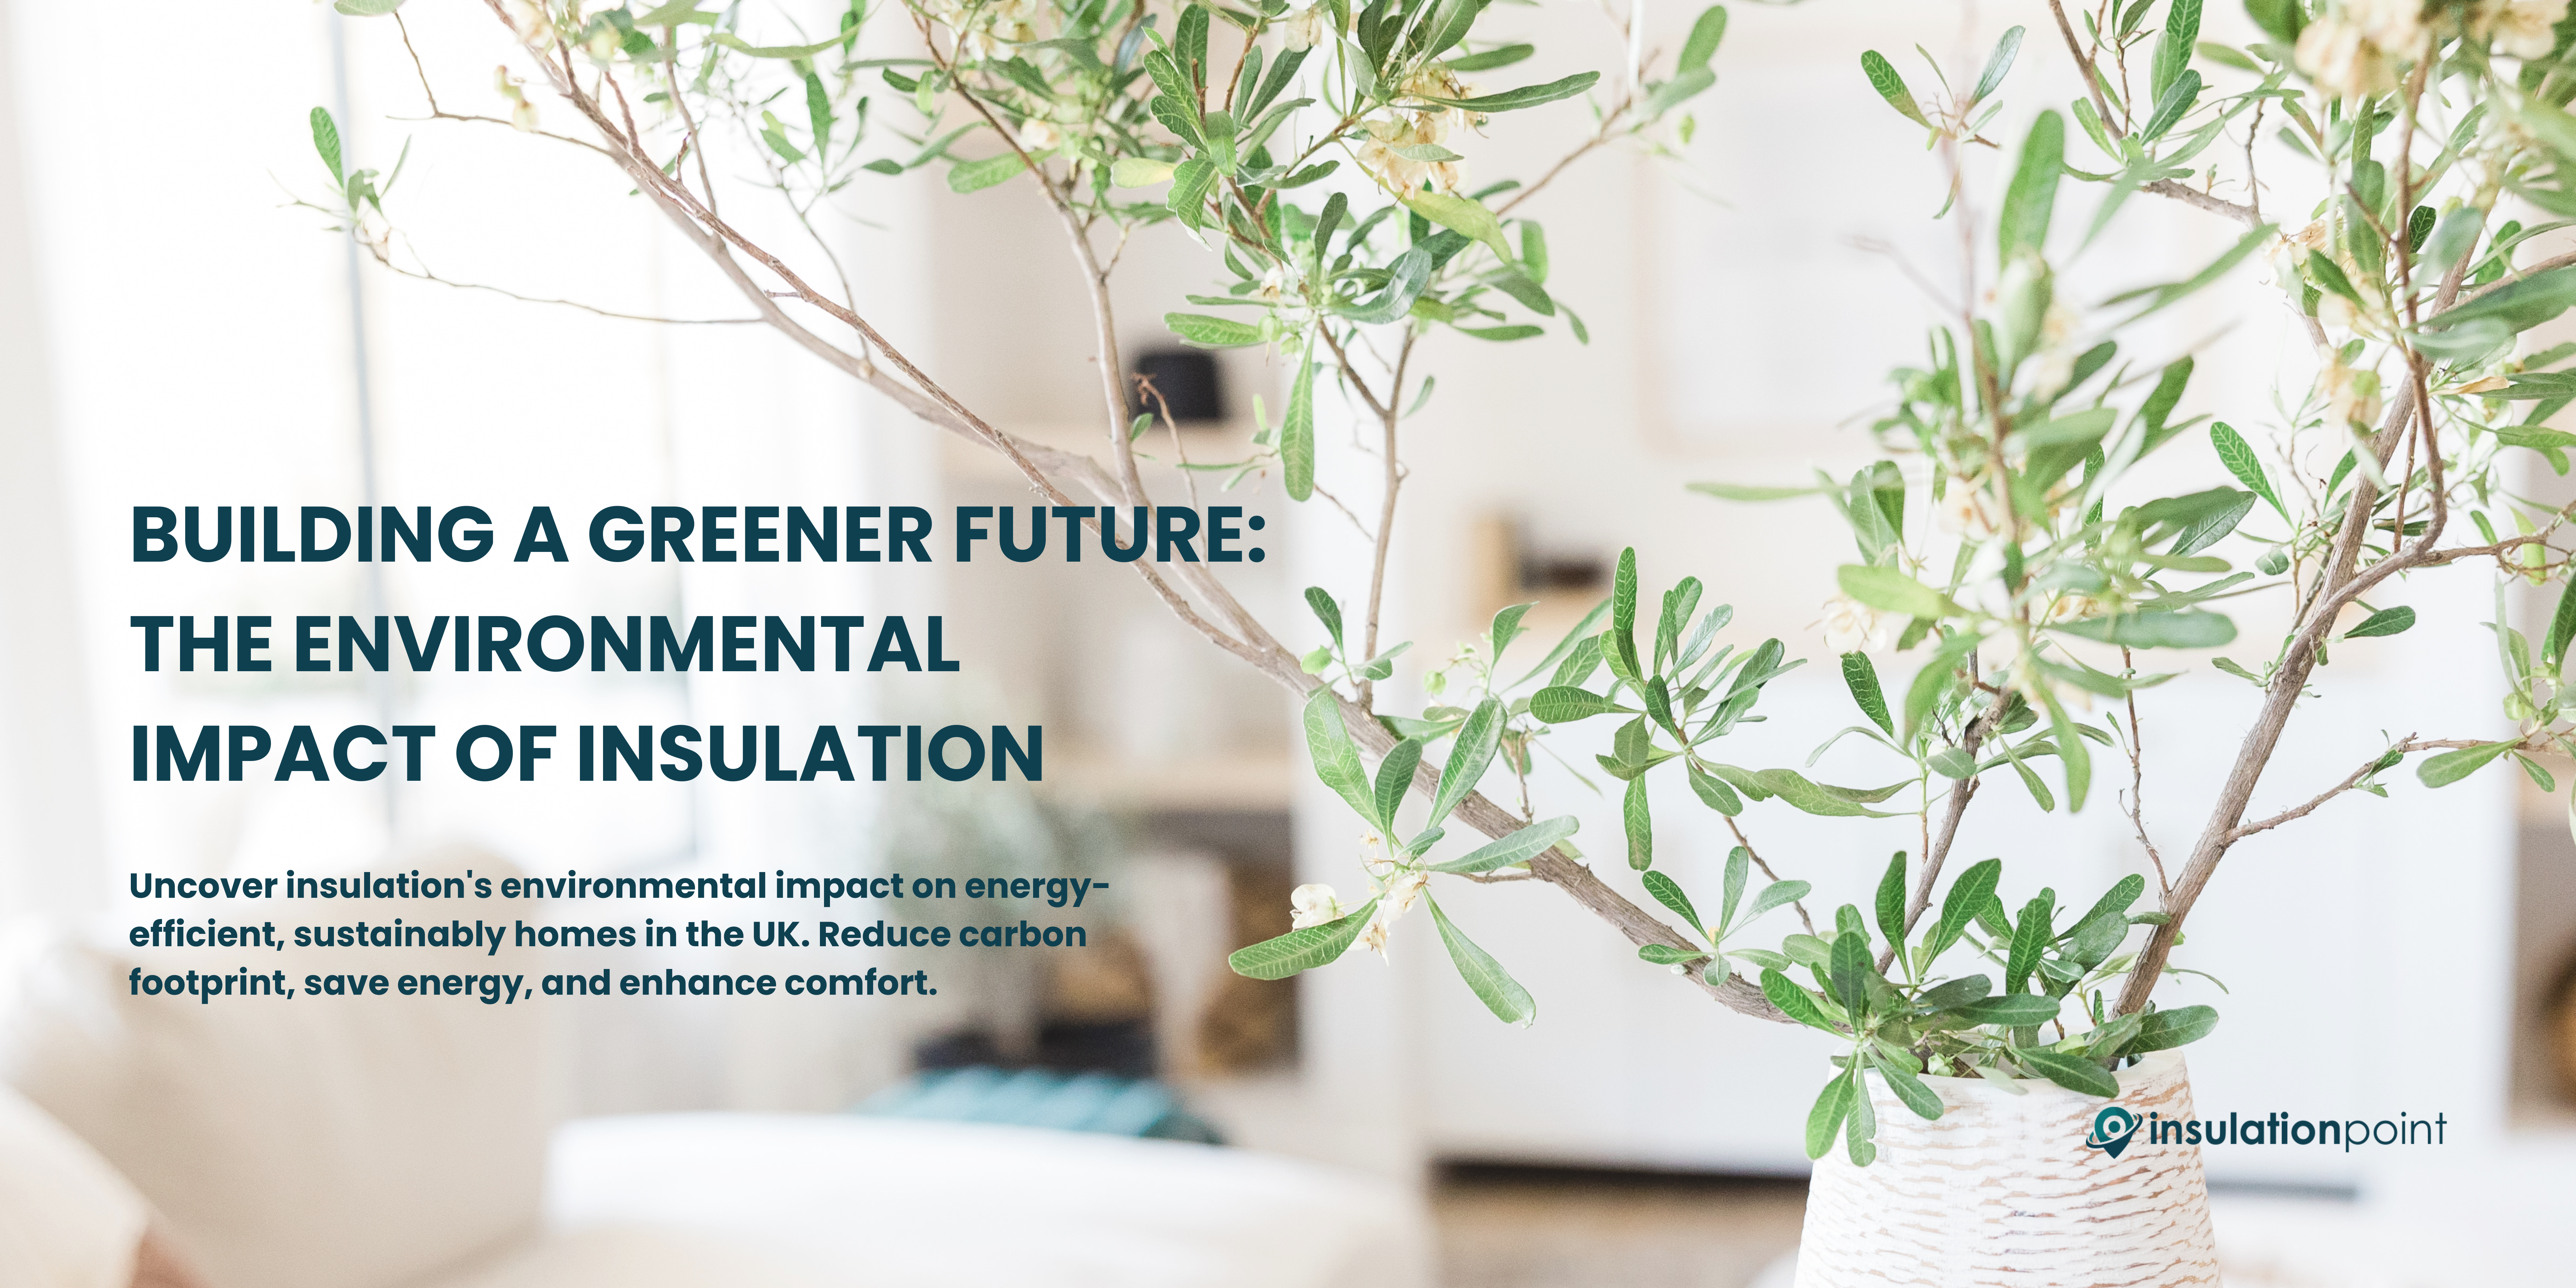 Building a Greener Future: The Environmental Impact of Insulation